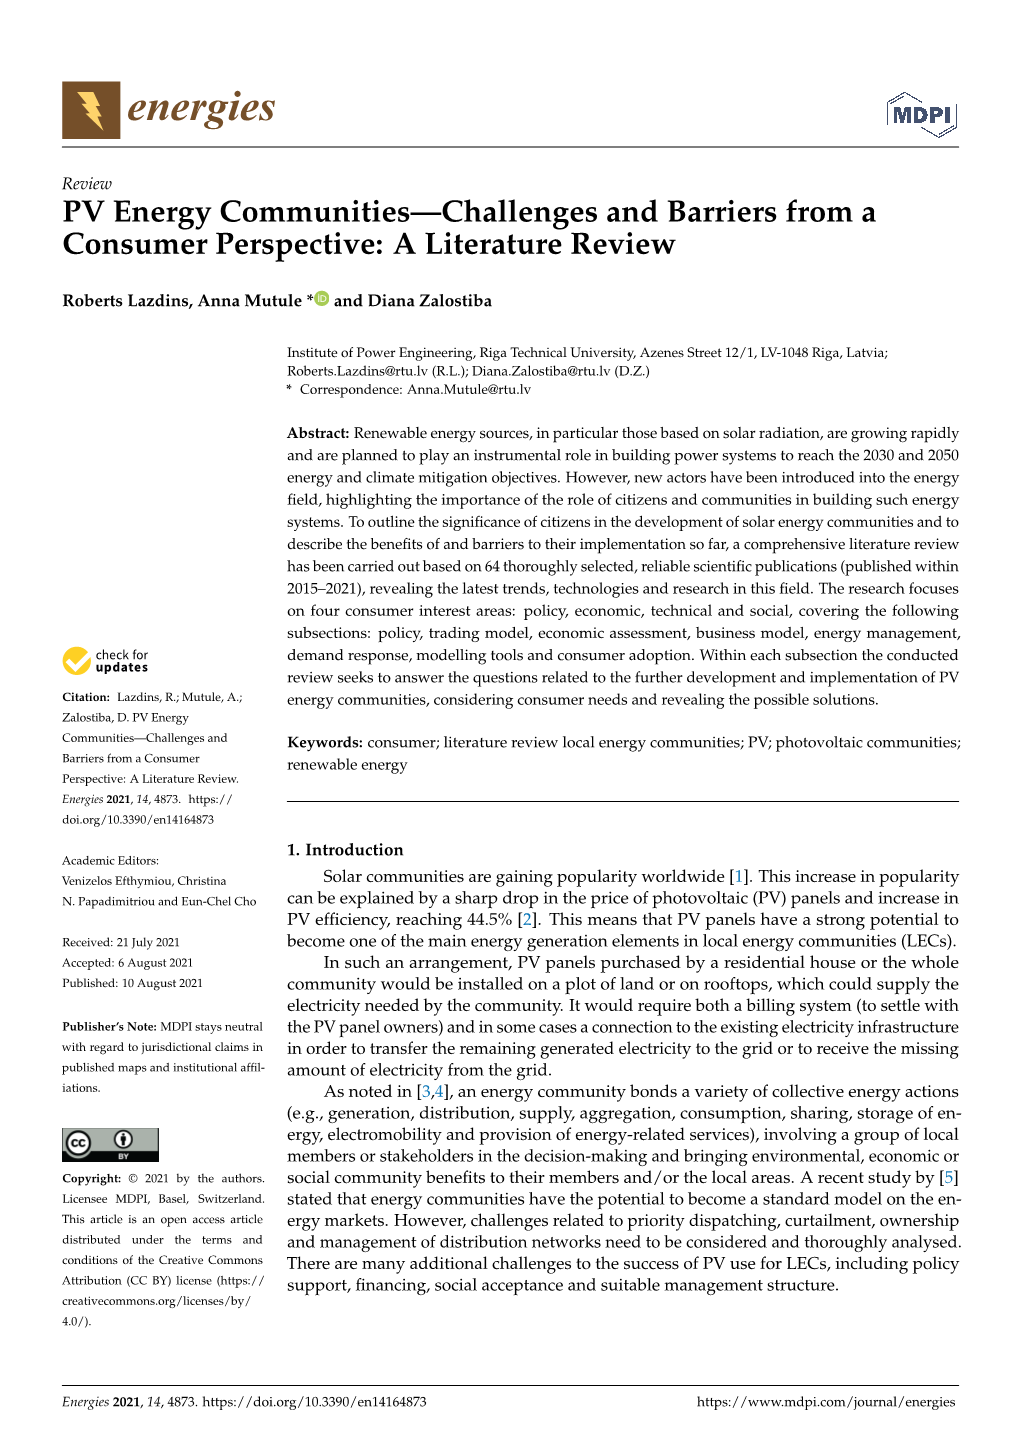 PV Energy Communities—Challenges and Barriers from a Consumer Perspective: a Literature Review